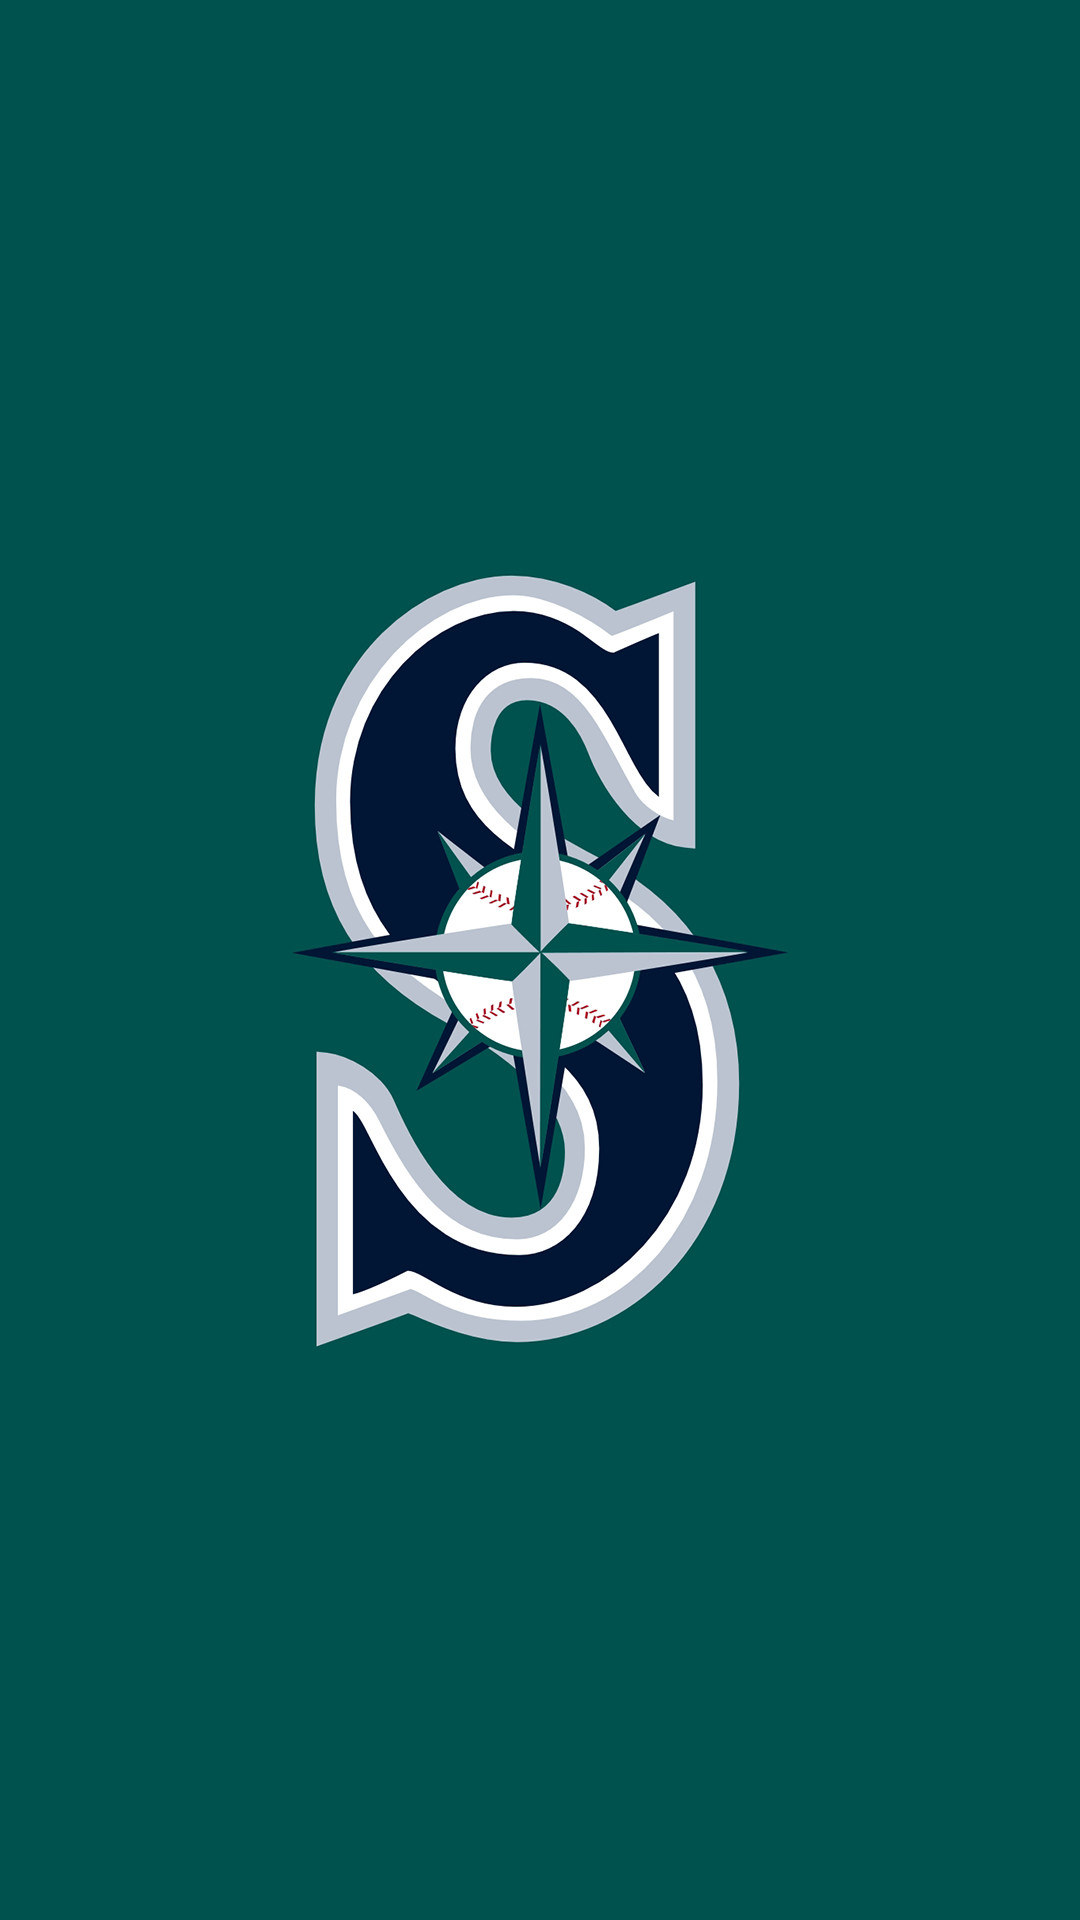 1080x1920 Download Baseball Image for Iphone.